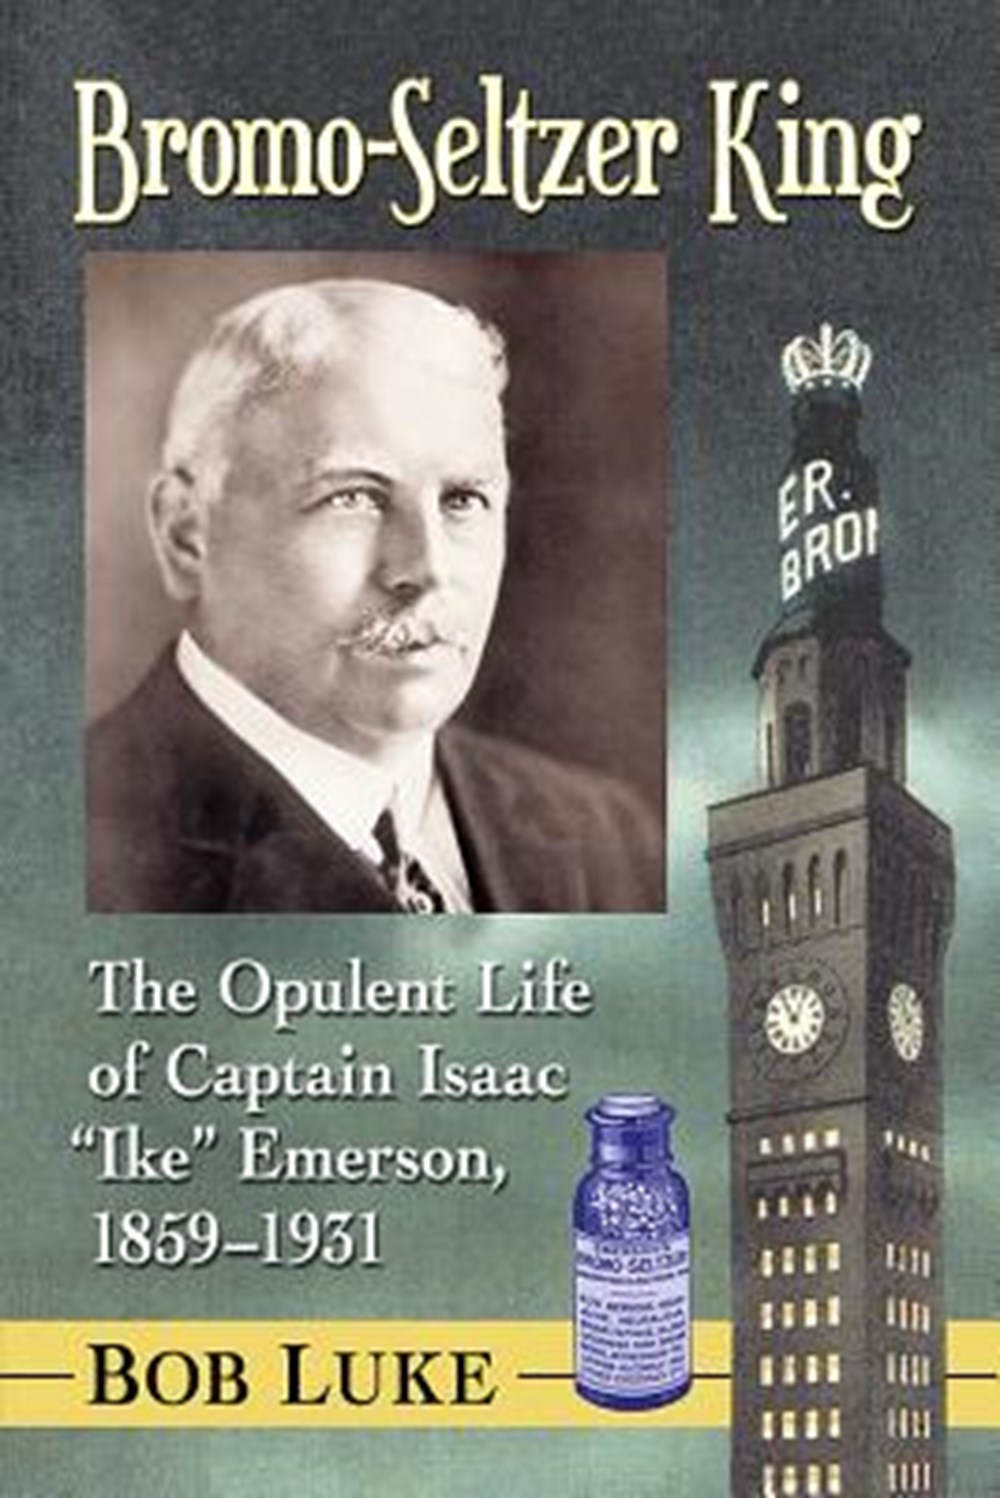 Bromo-Seltzer King The Opulent Life of Captain Isaac "ike" Emerson, 1859-1931